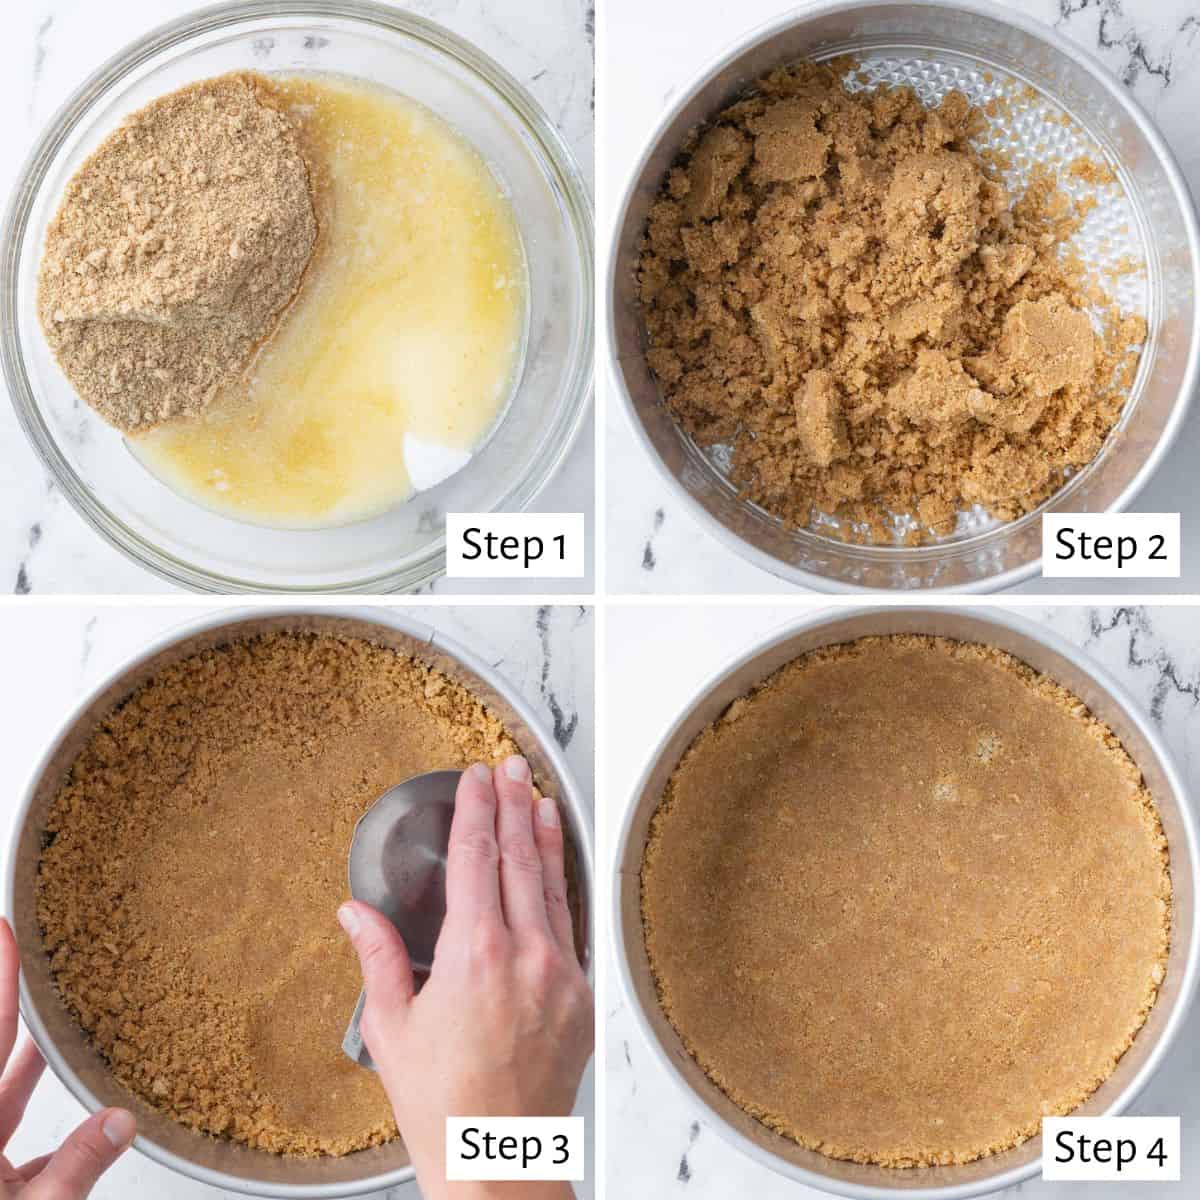 4 image collage make crust: 1- graham cracker crumbs and melted butter in a bowl, 2- crust mixture added to springform pan, 3- measuring cup flattening crumbs into pan, 4- after pressed completely.